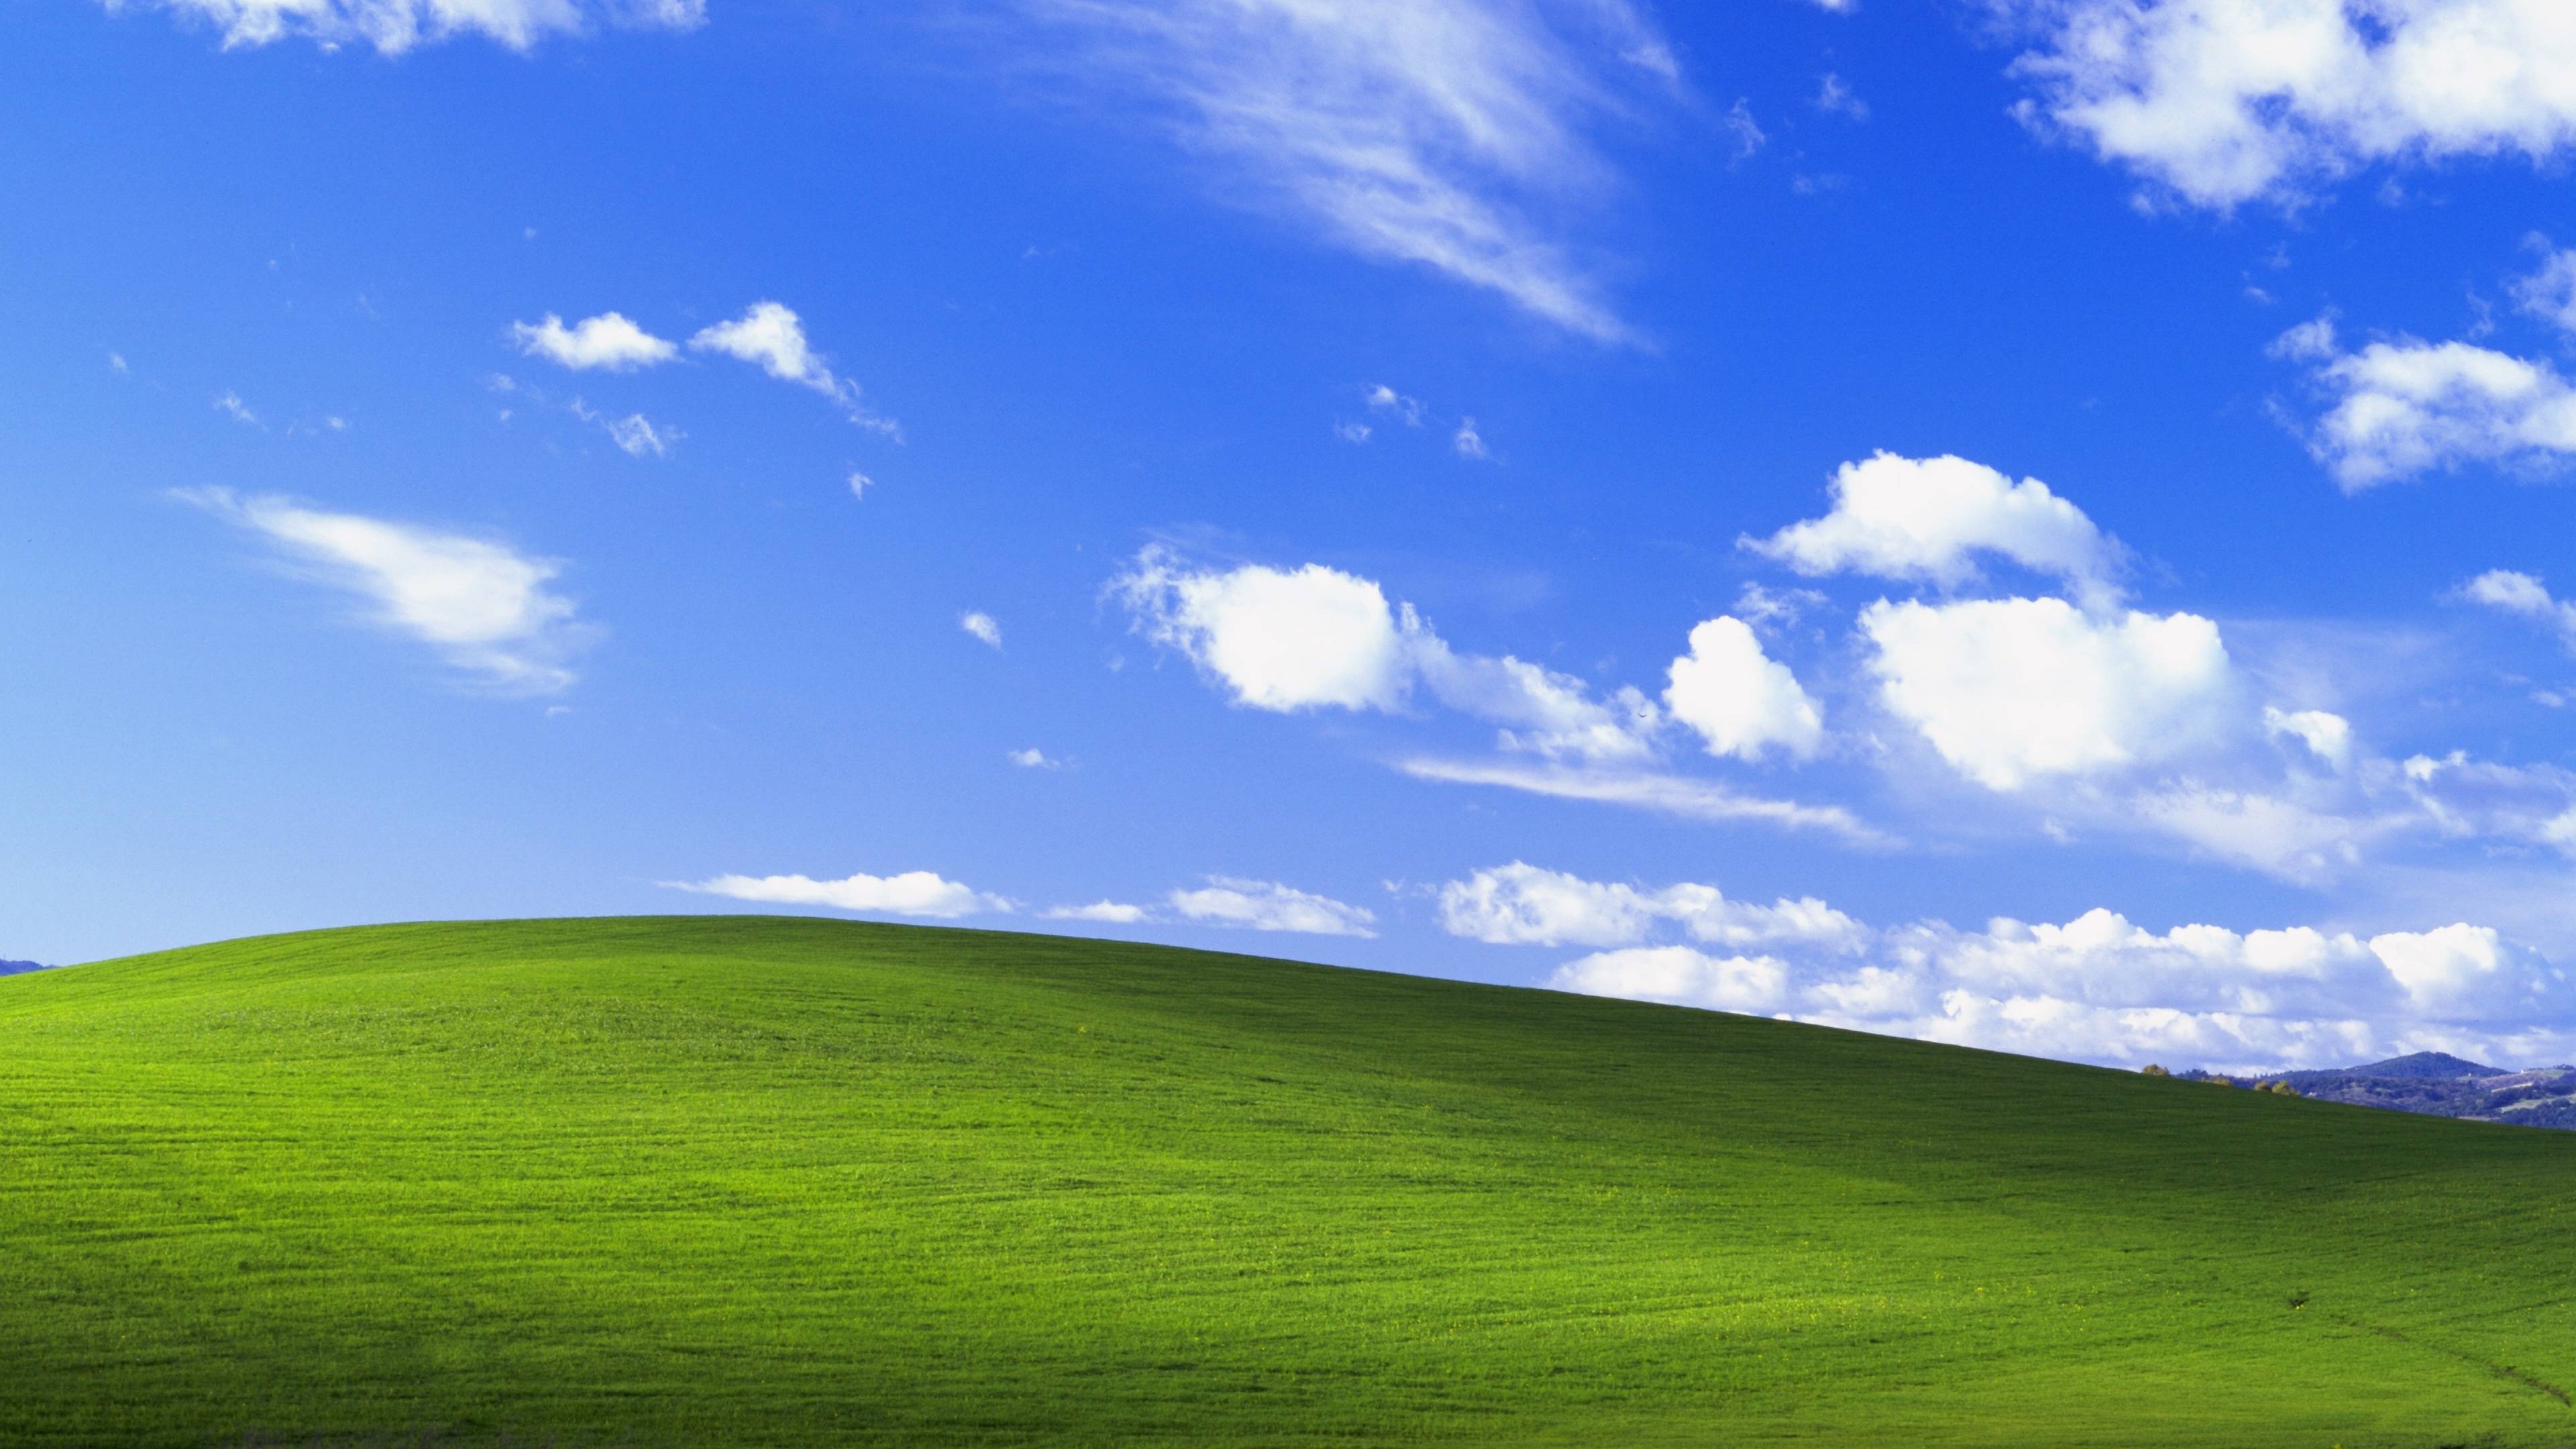 The Windows XP wallpaper at 4K resolution wallpapers